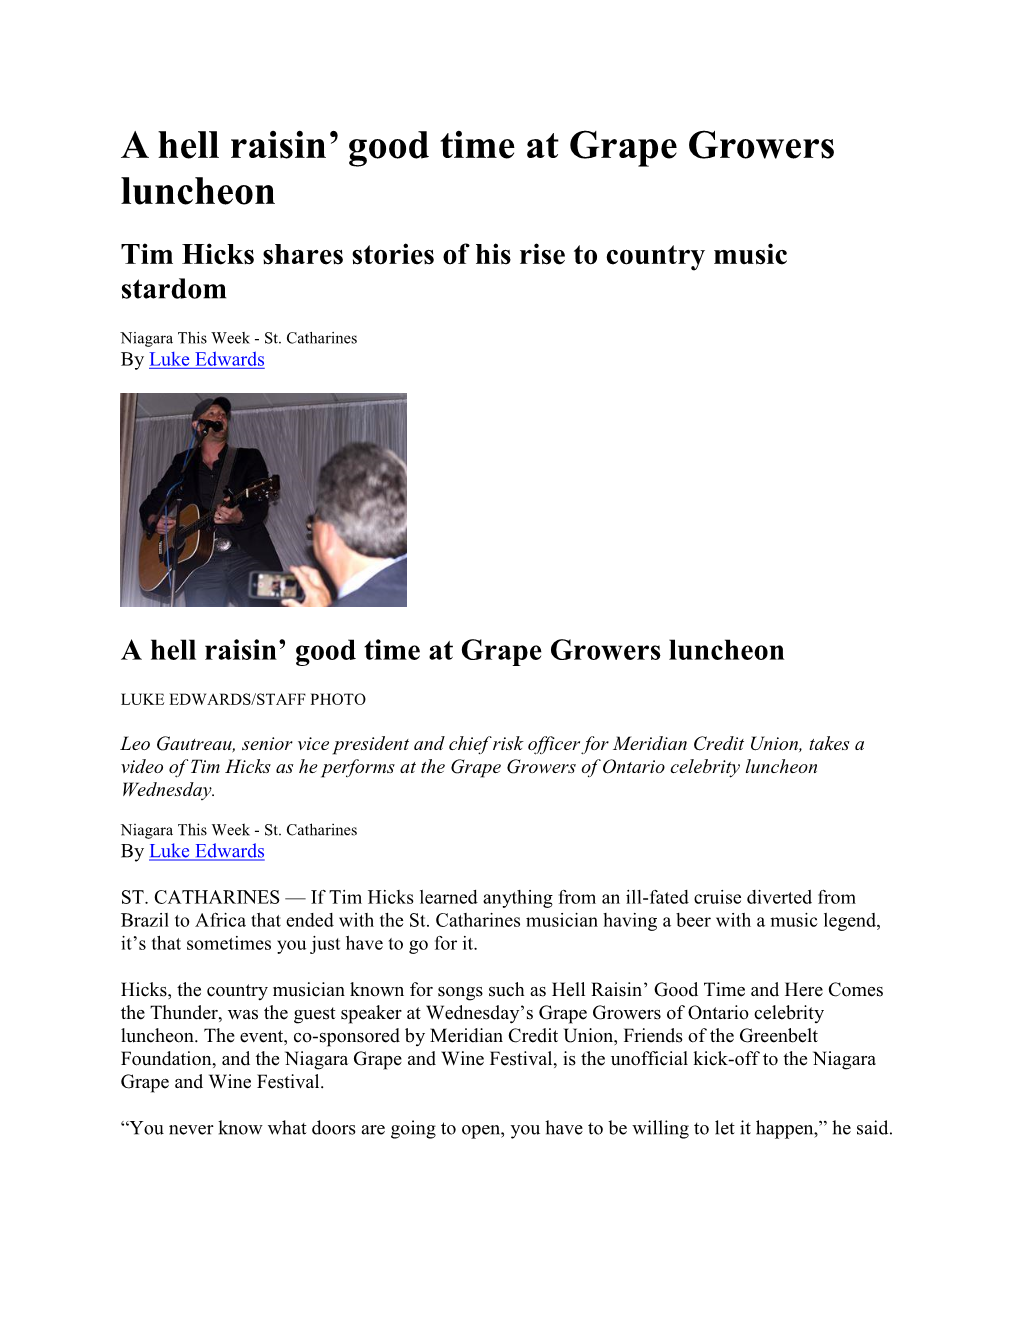 A Hell Raisin' Good Time at Grape Growers Luncheon